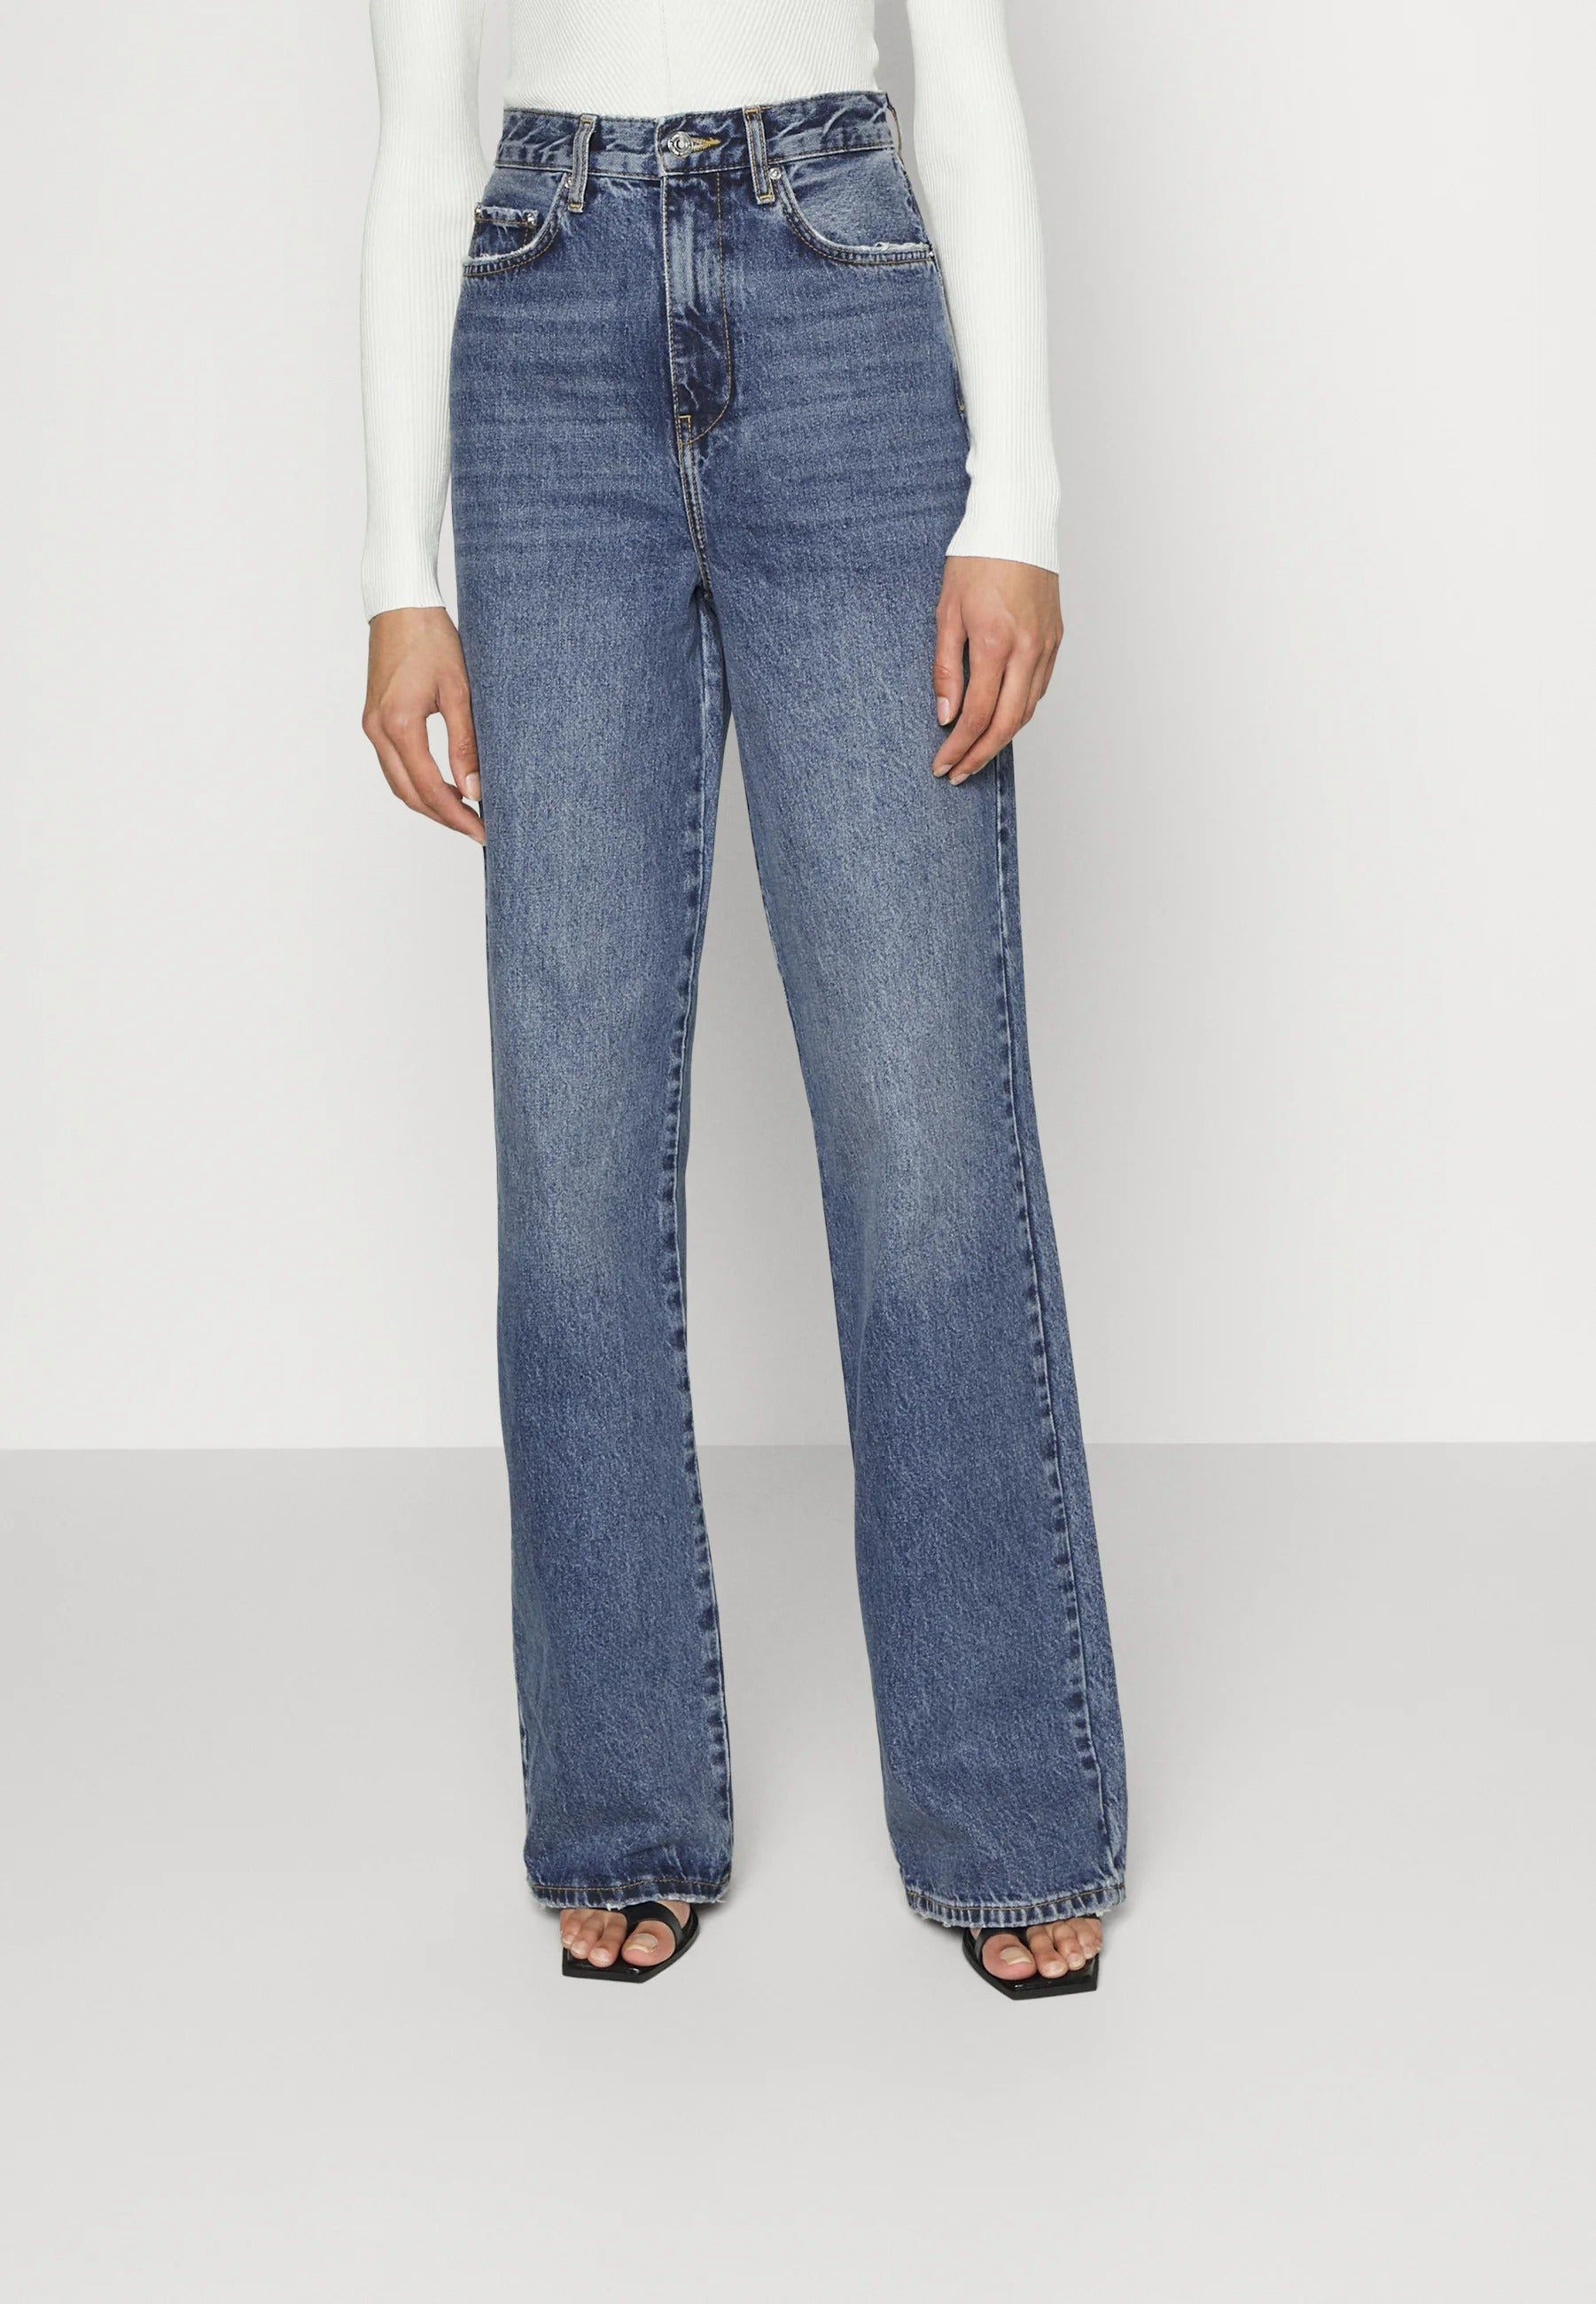 Robust Postbud invadere Vero Moda Tall + Relaxed fit jeans